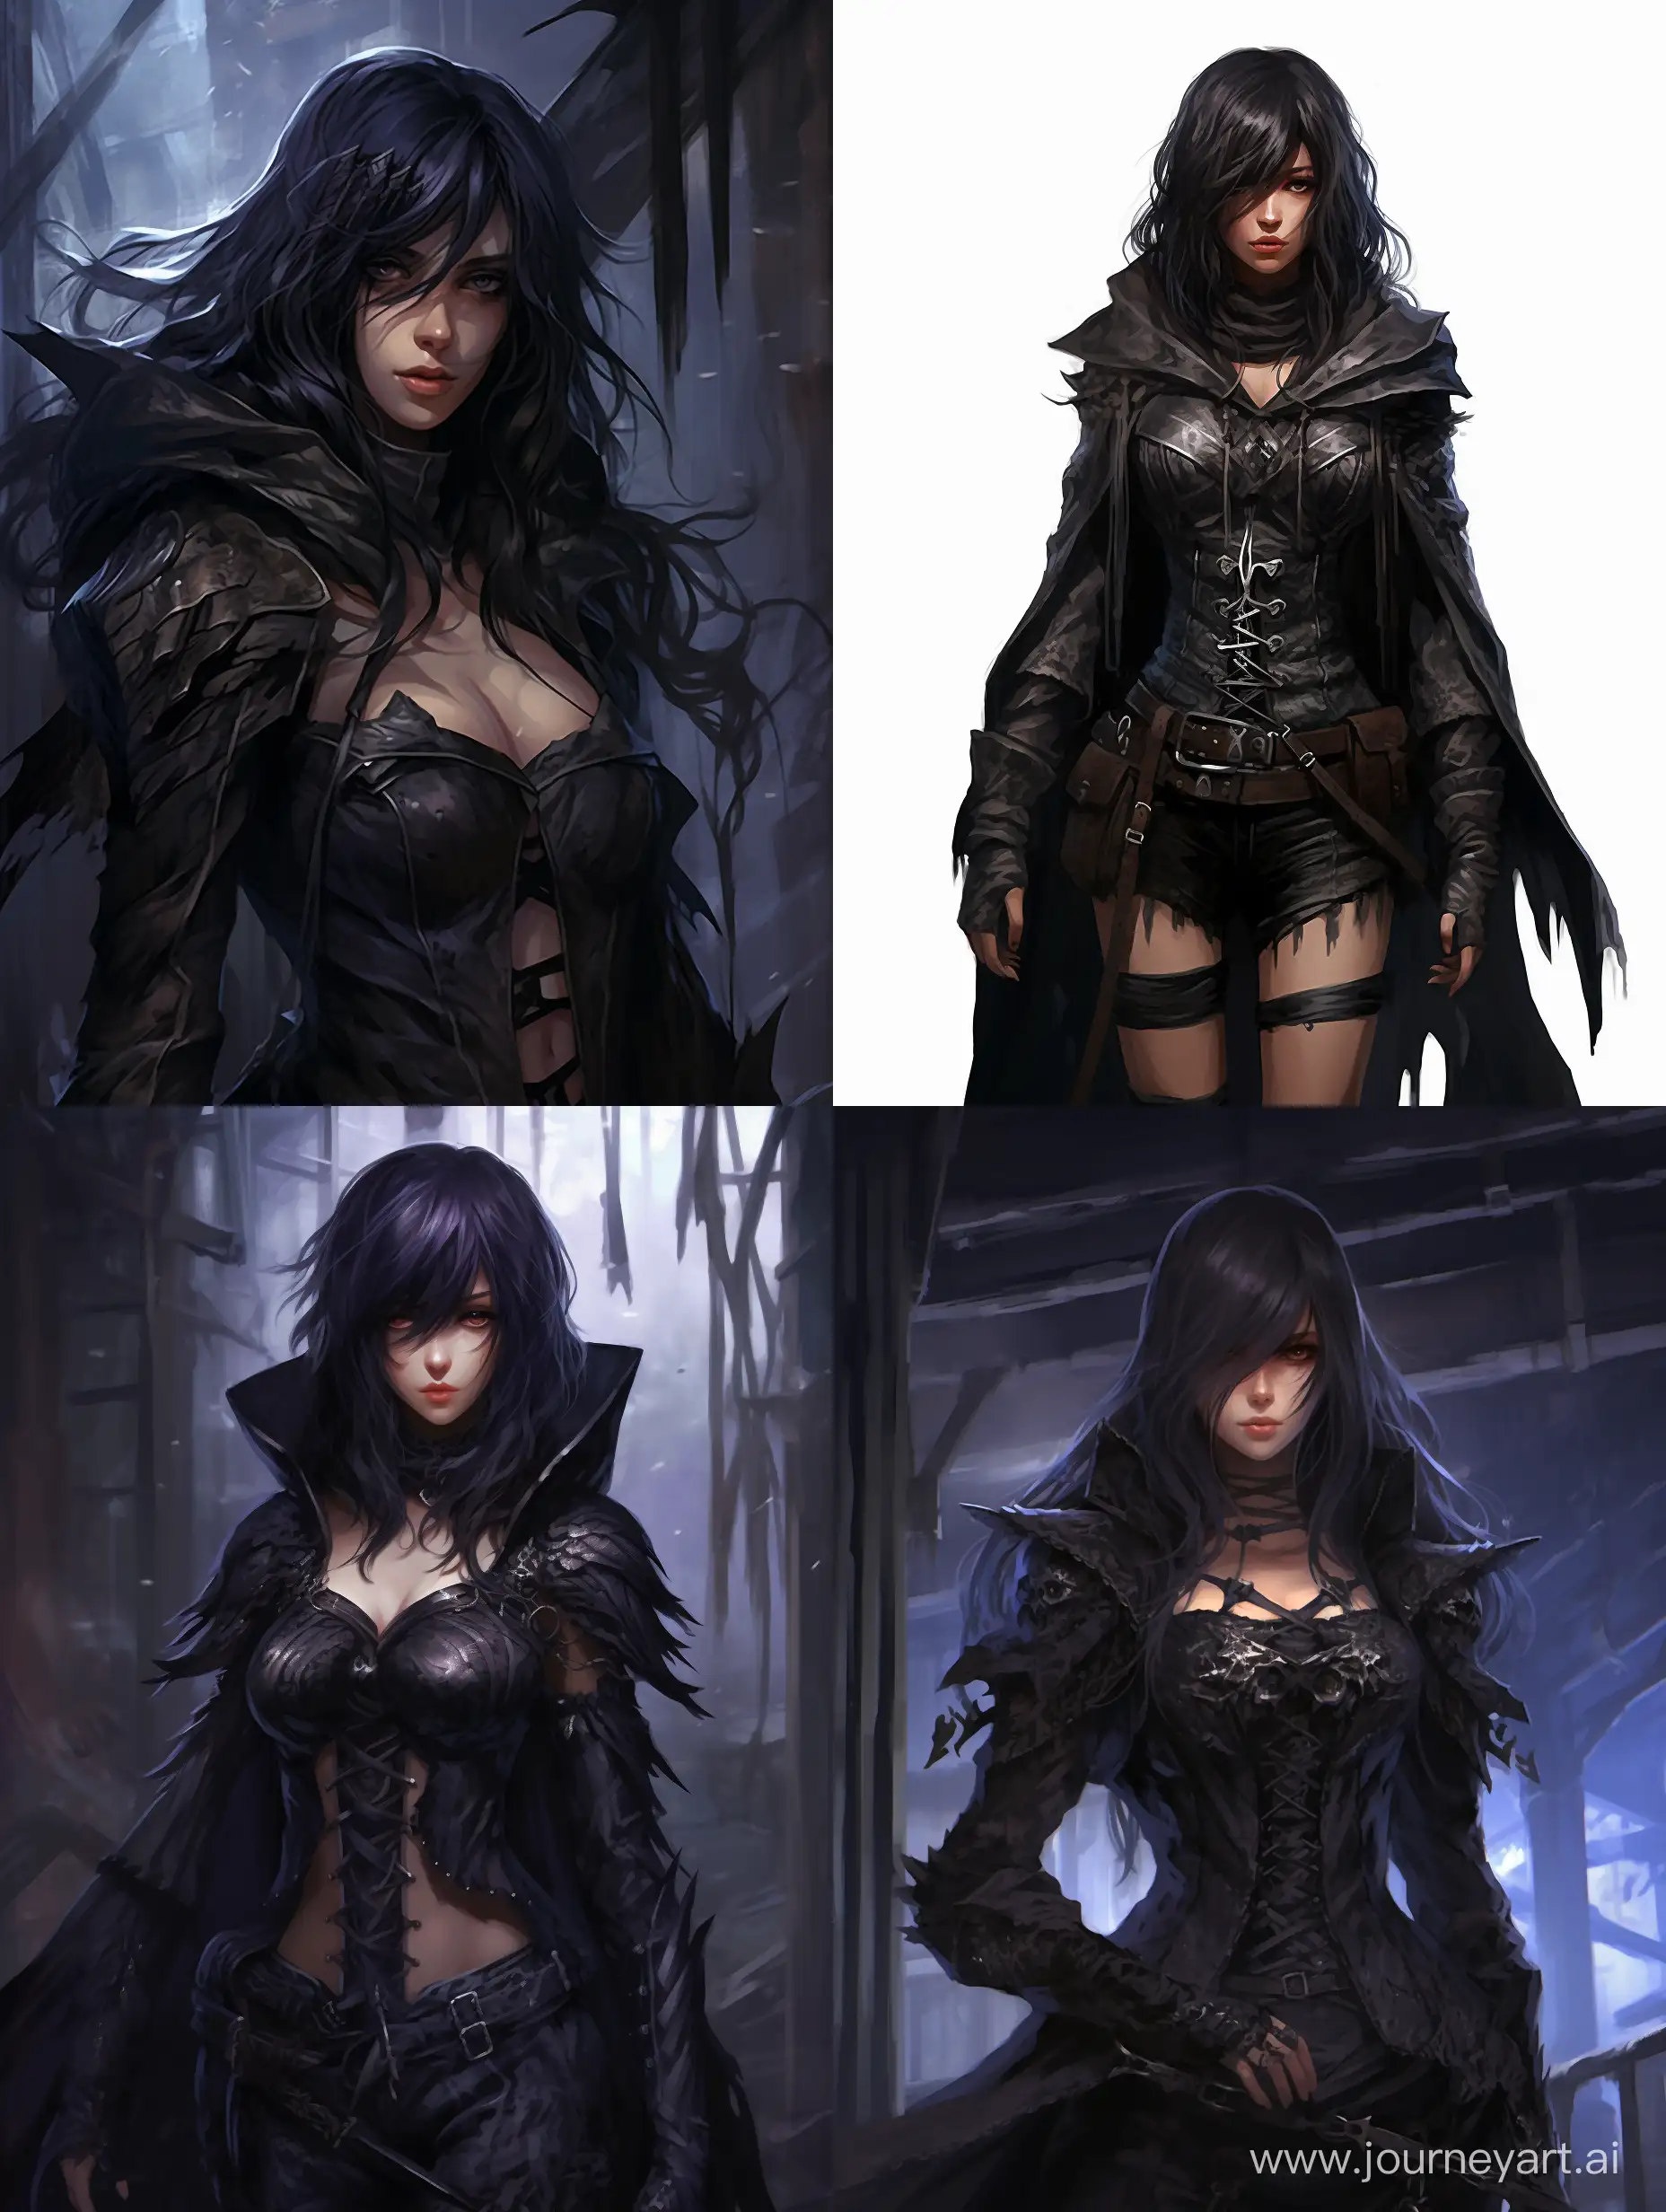 A full body portrait, anime, fantasy based, of a female elf sorcerer with black shoulder length hair, violet eyes, pale skin with freckles, seductive expression, a small scar in the right side of her neck, wearing full black, a two piece black leather clothing covered by a hooded black cloak that is closed with a round pin of a raven, also wearing high black leather boots. Jennefer de Vengerber from The Witcher 3 videogame style